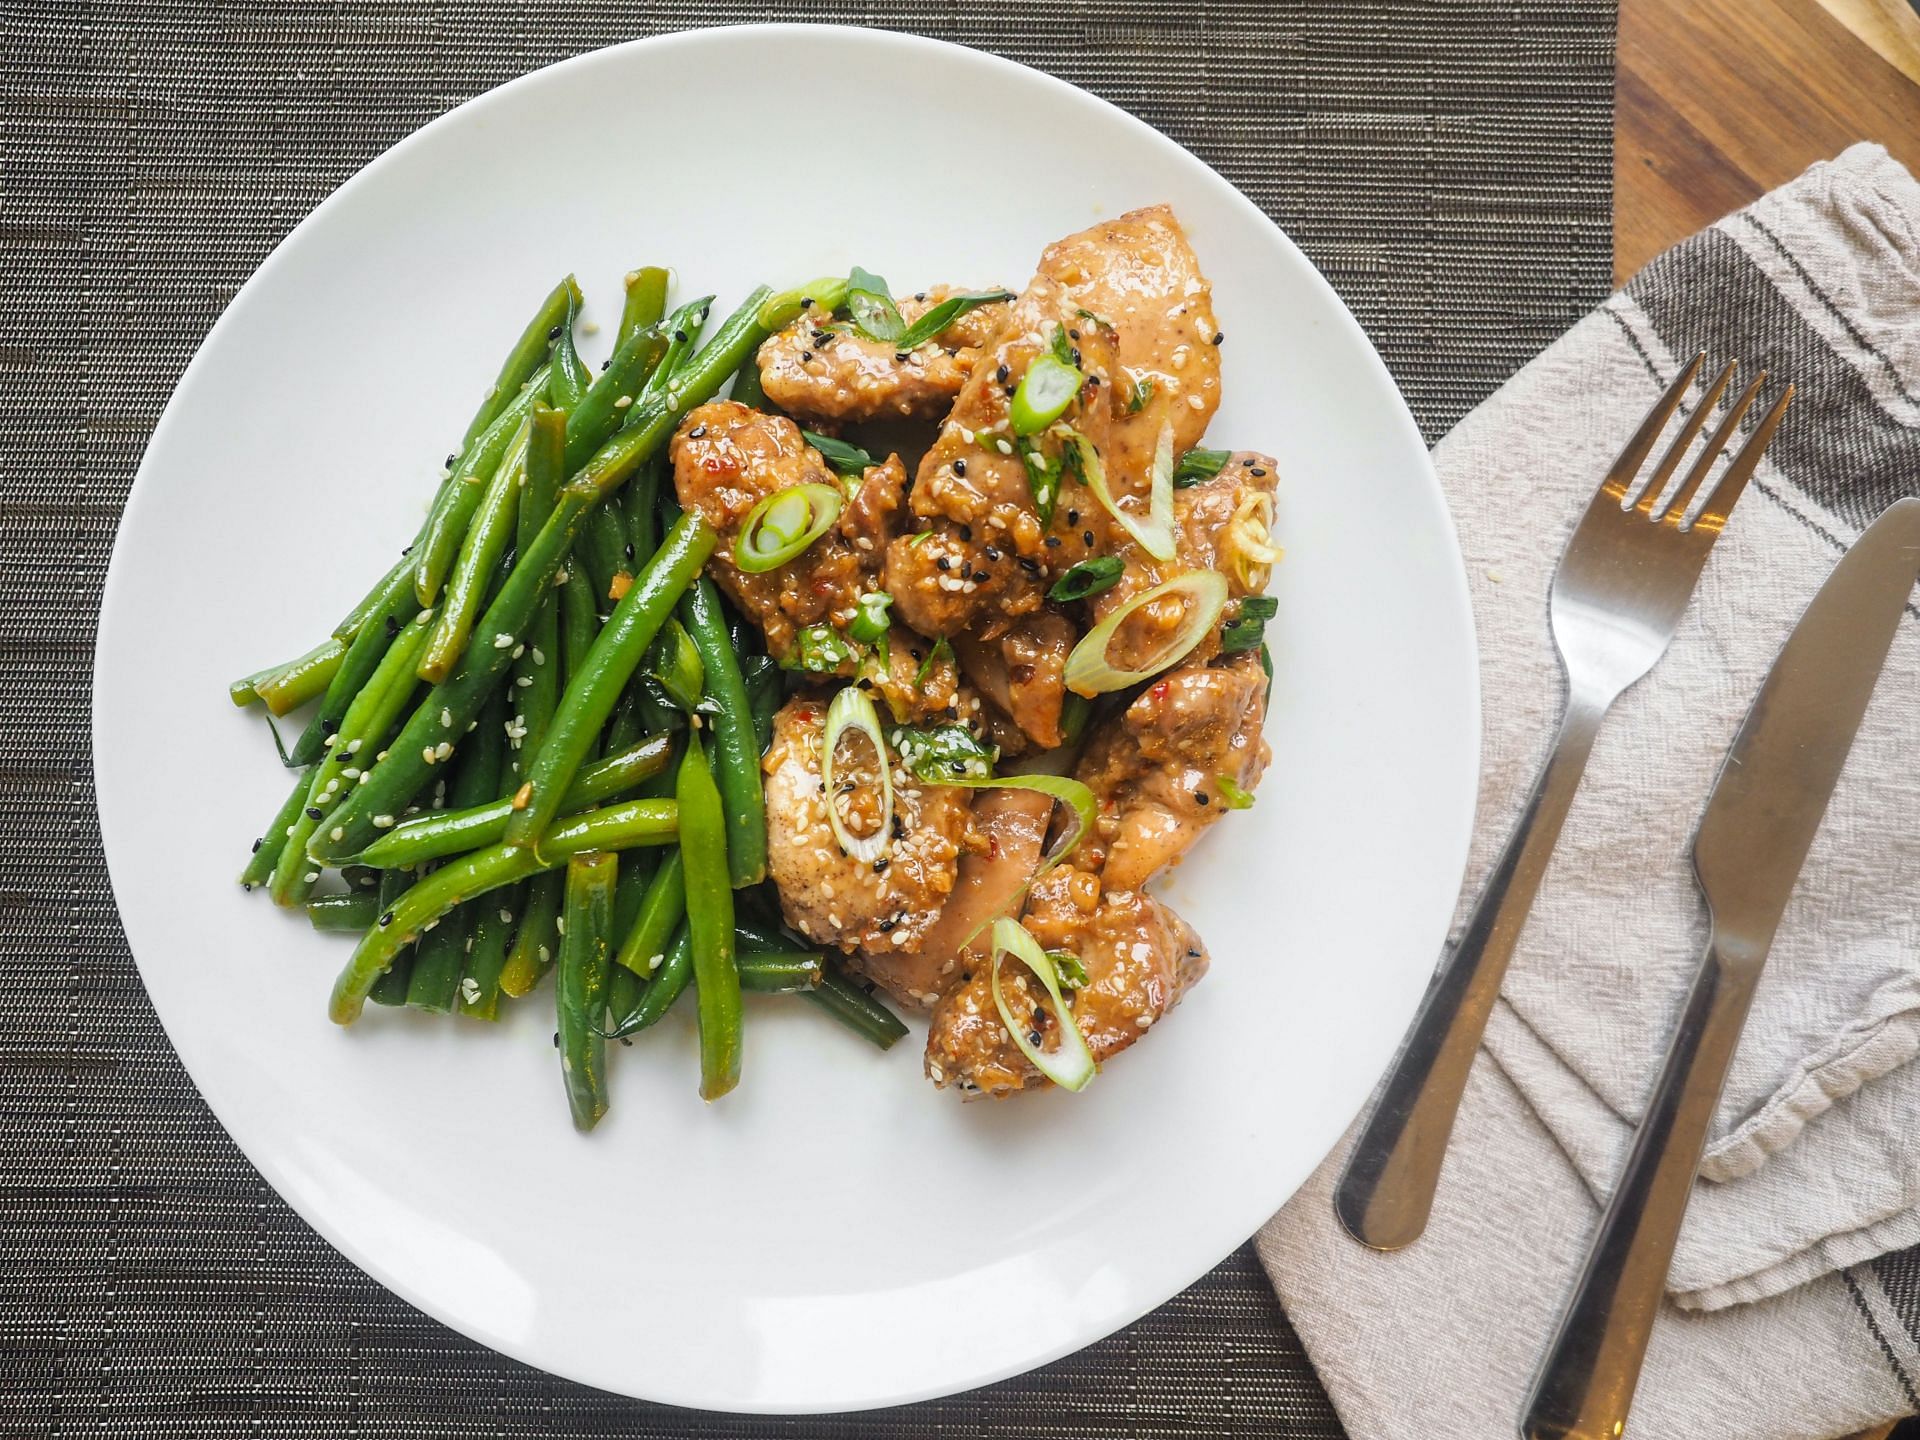 Use a larger plate to increase your appetite. (Image via Pexels)